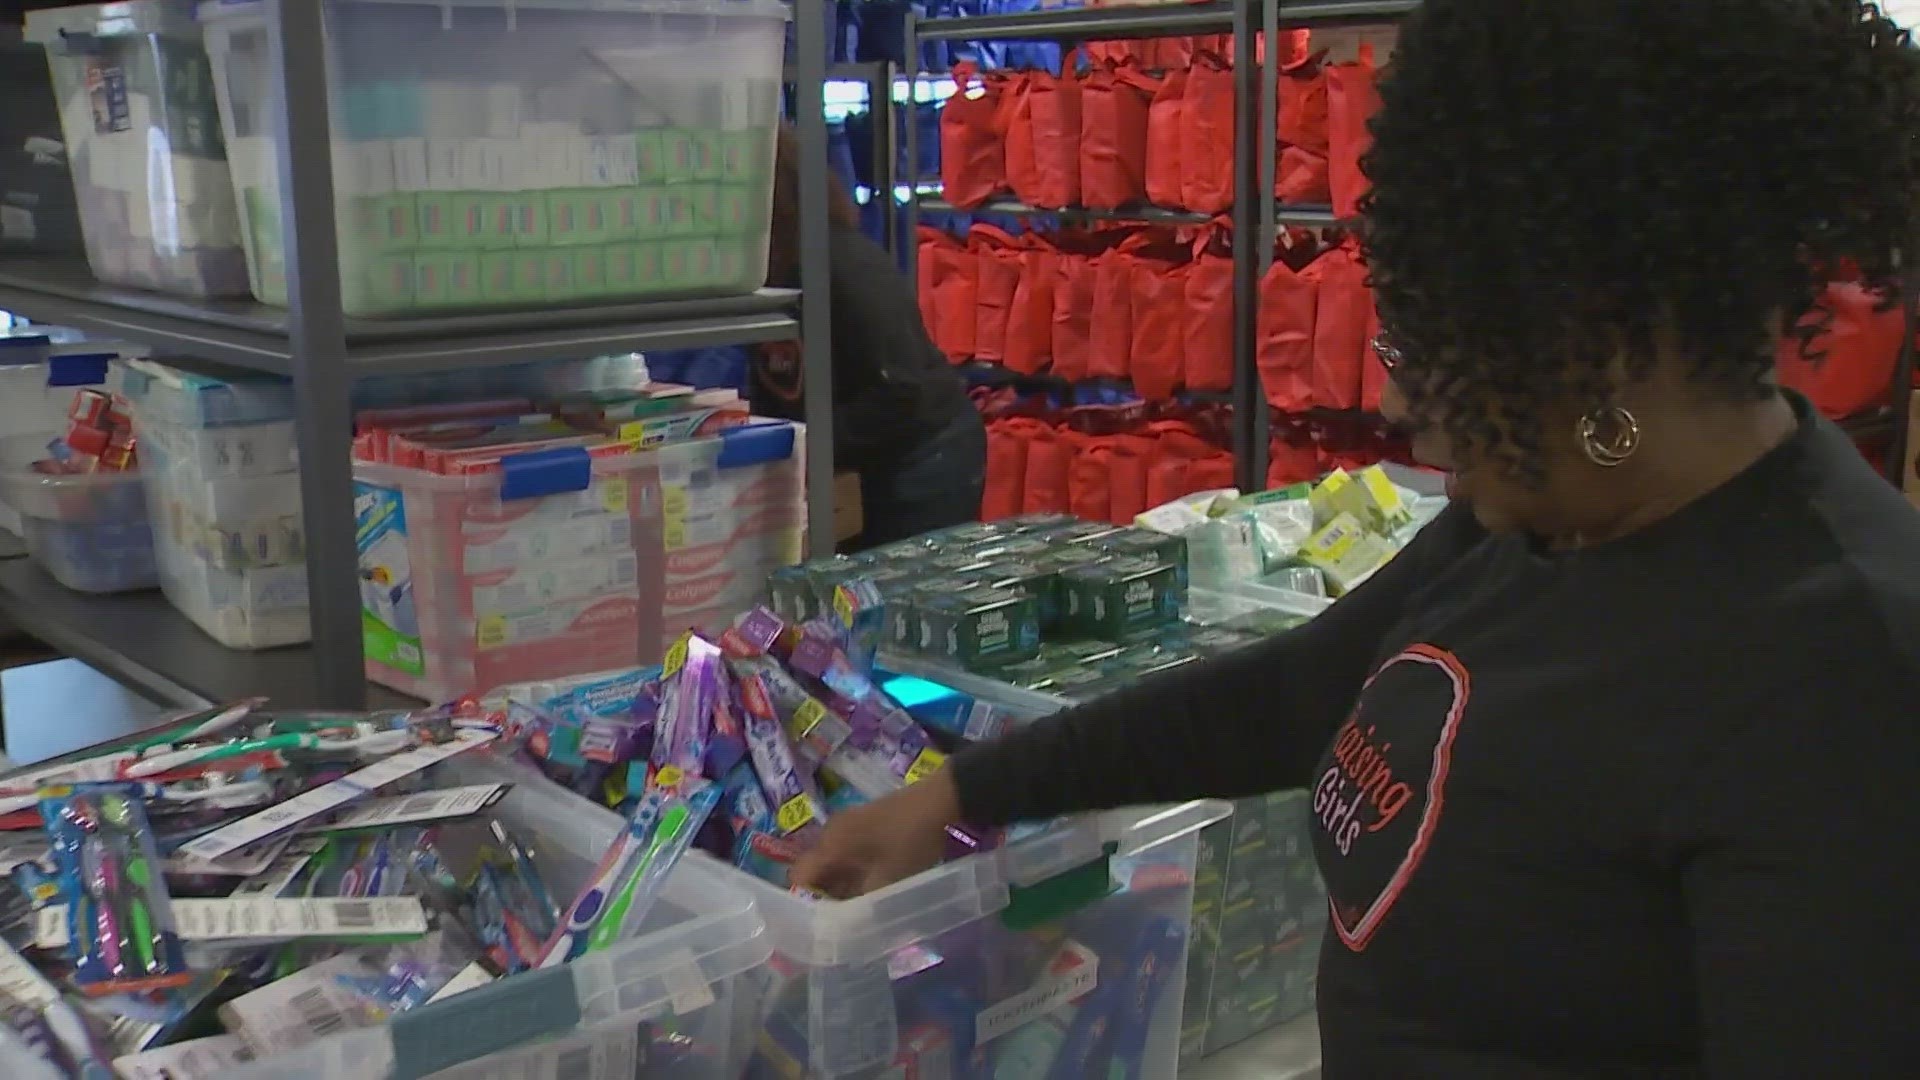 The non-profit organization is working to address period poverty and hygiene insecurity.